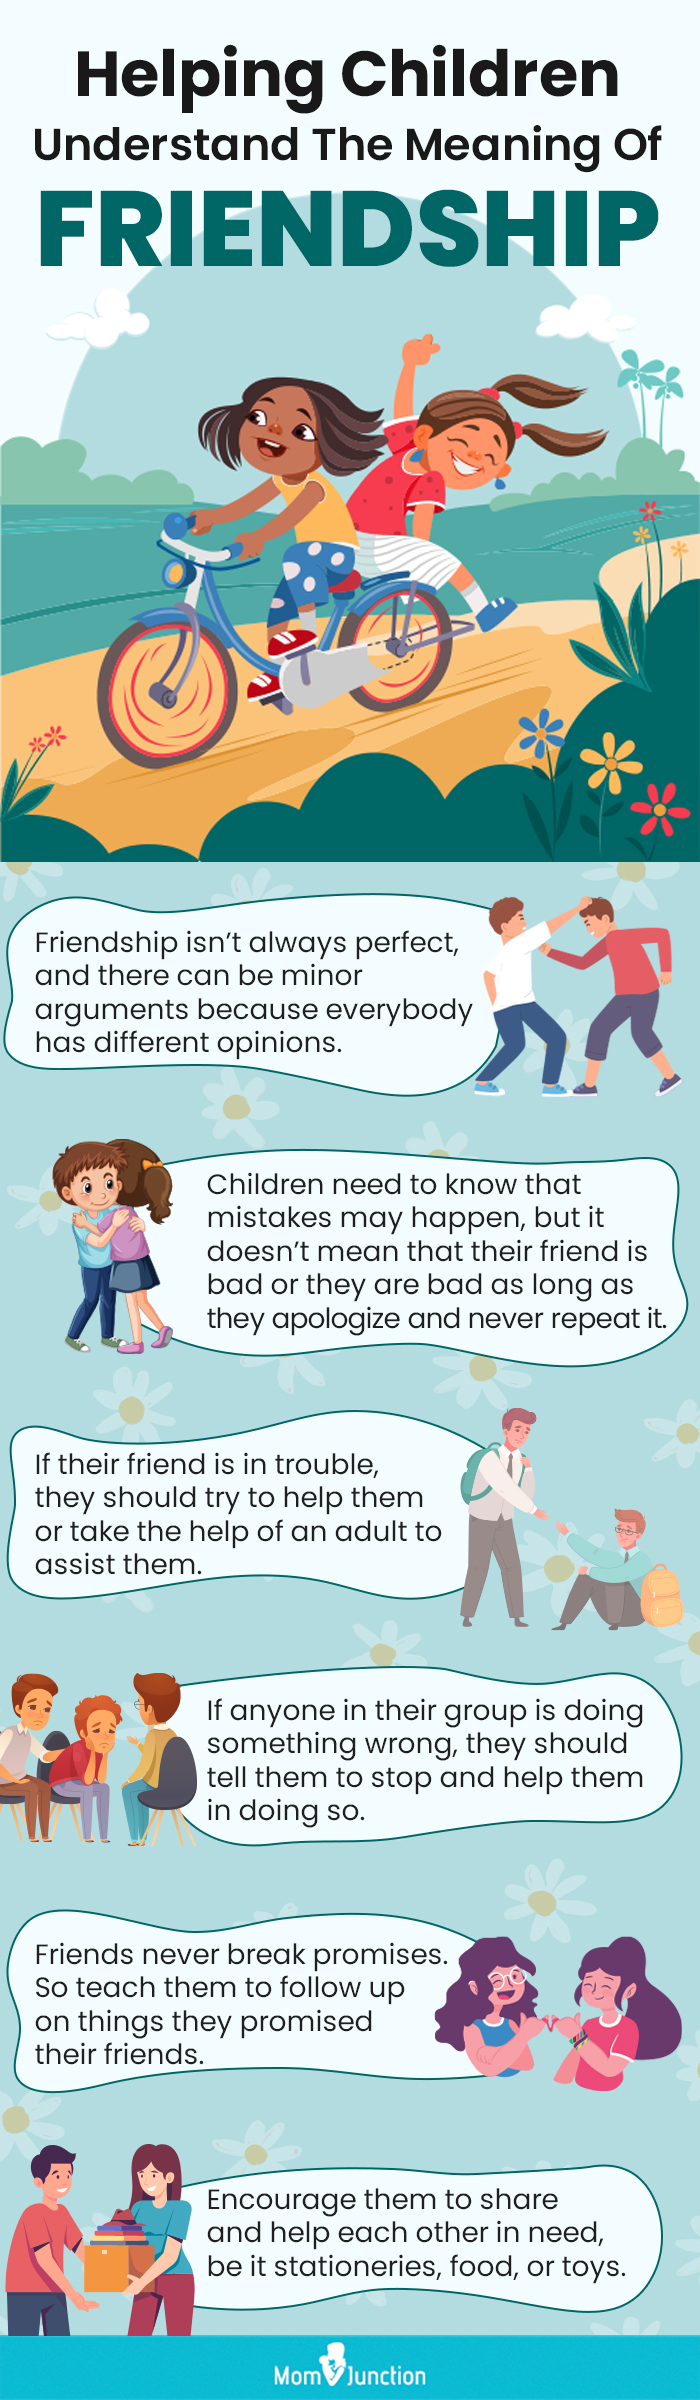 helping children understand the meaning of friendship (infographic)